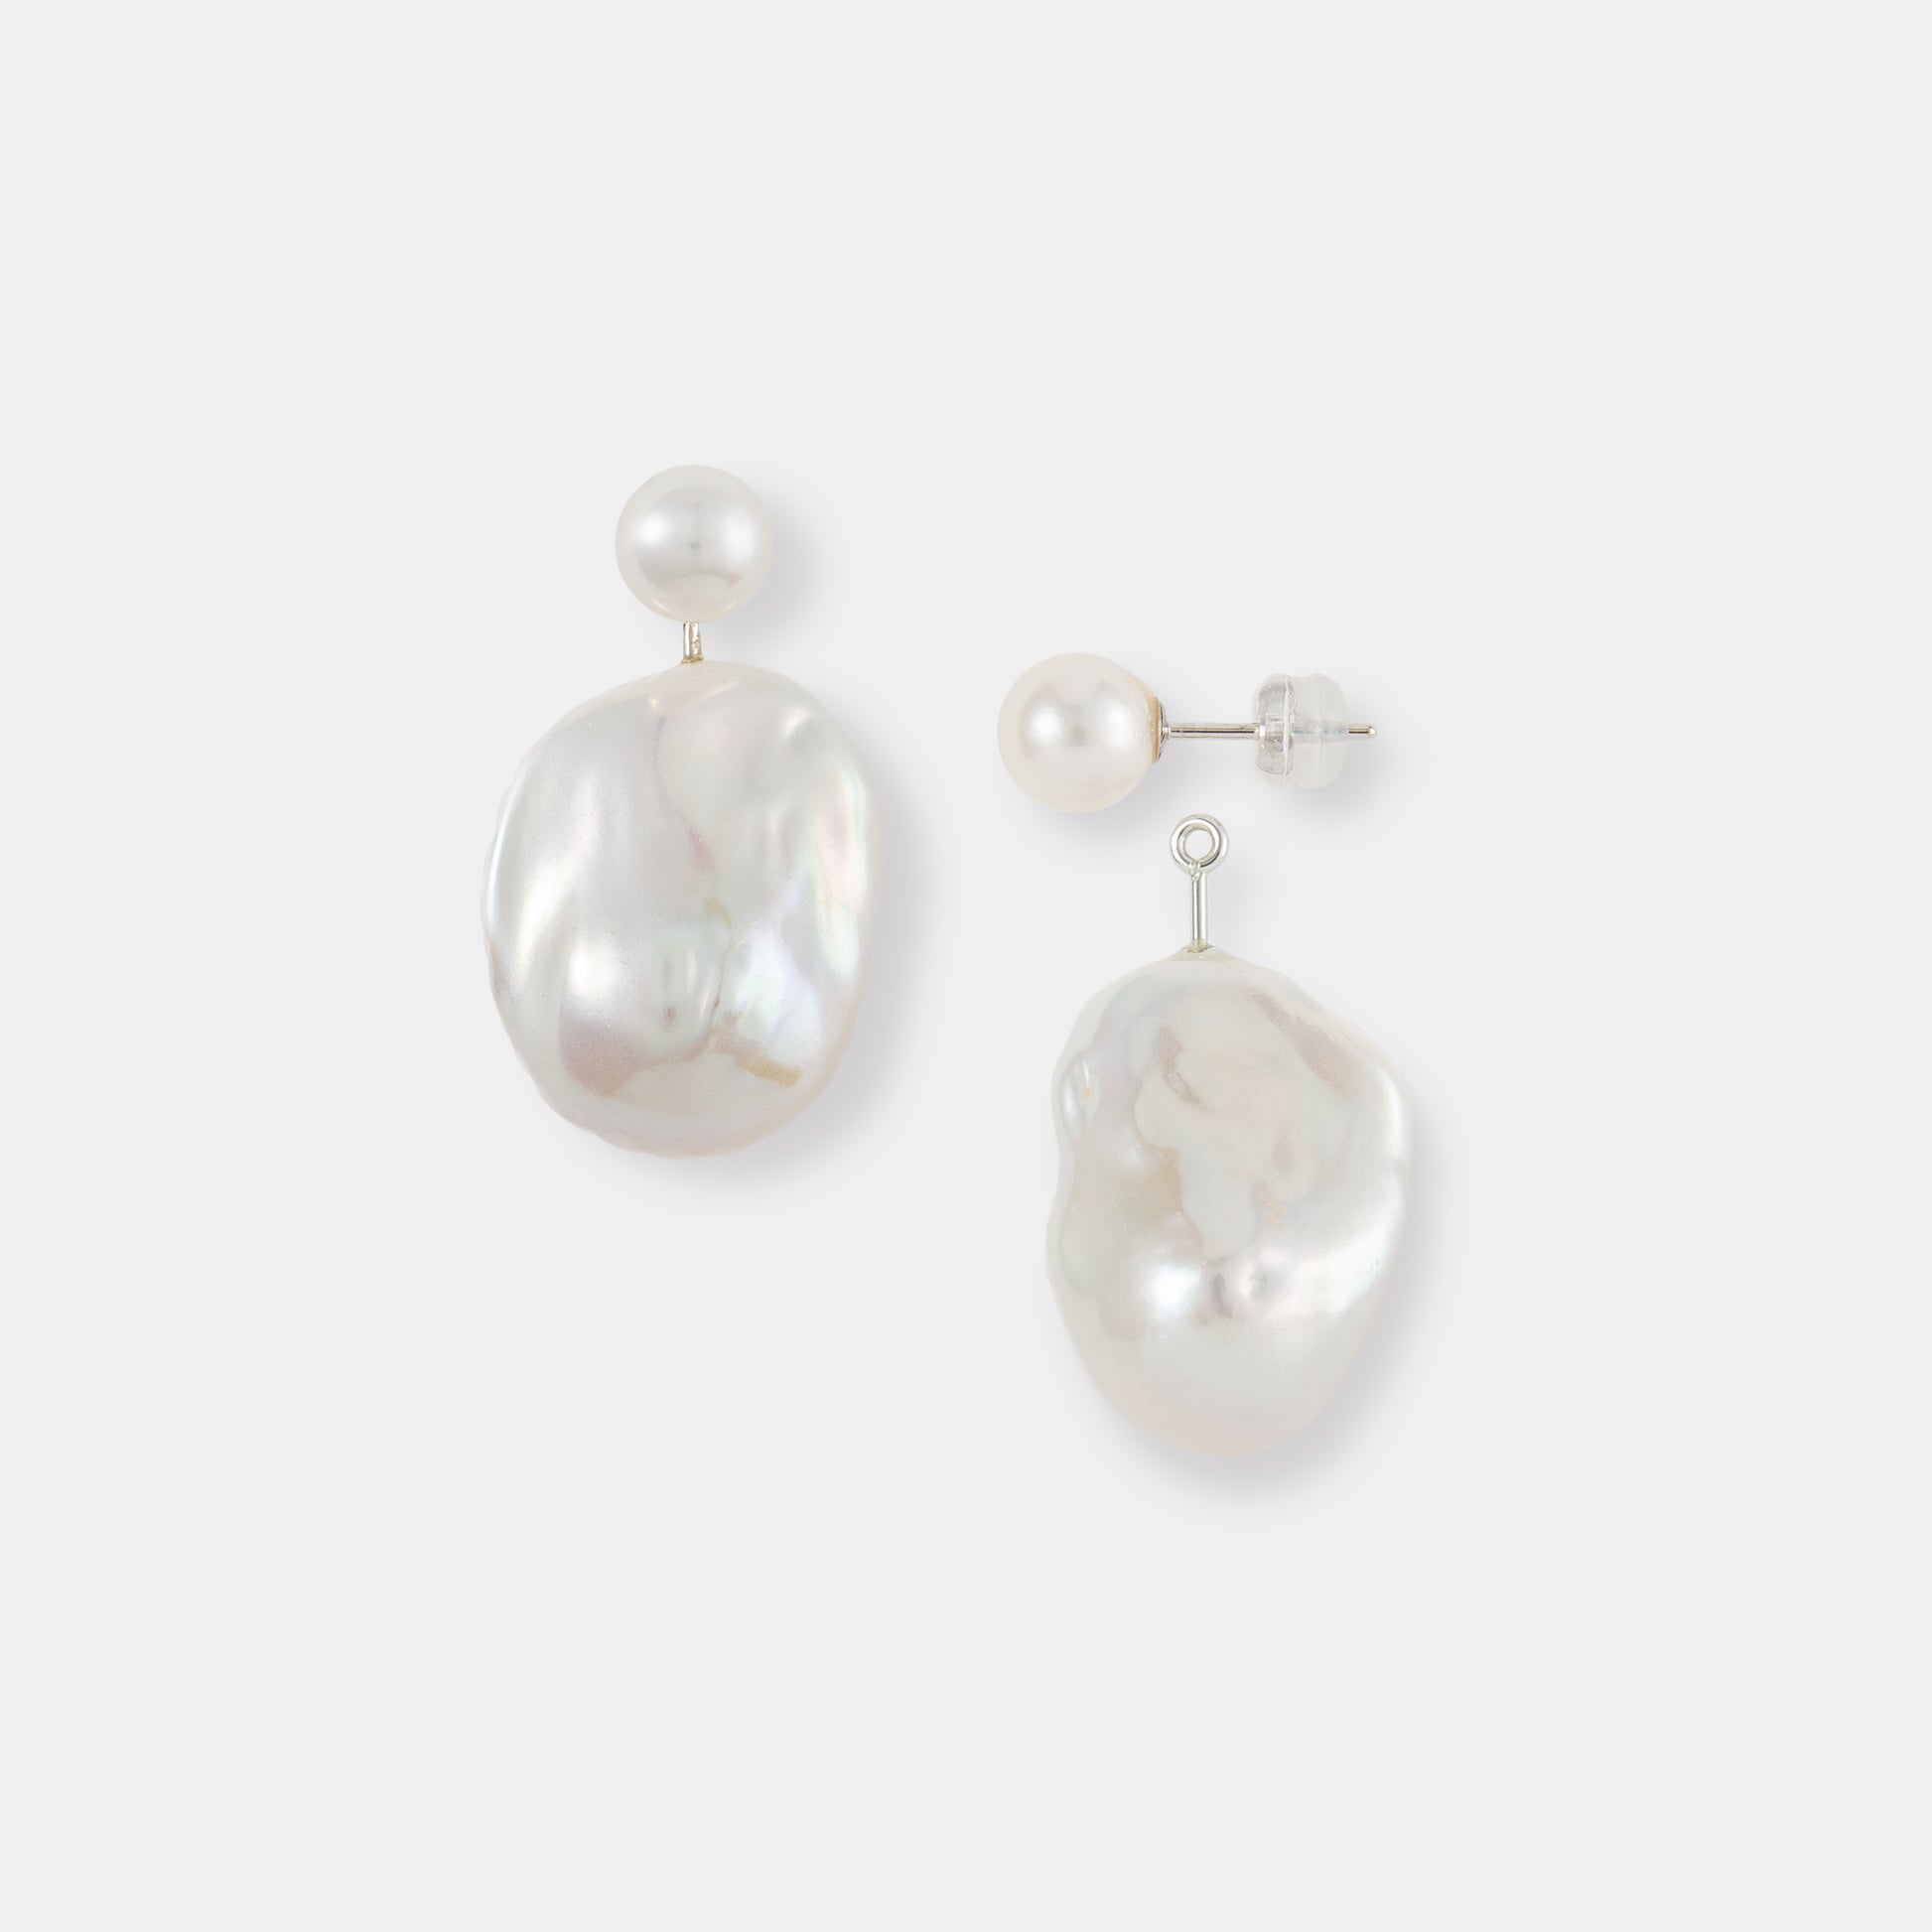 Enhance your look with these stunning Baroque Pearl Charm Piercing earrings, showcasing lustrous white pearls.